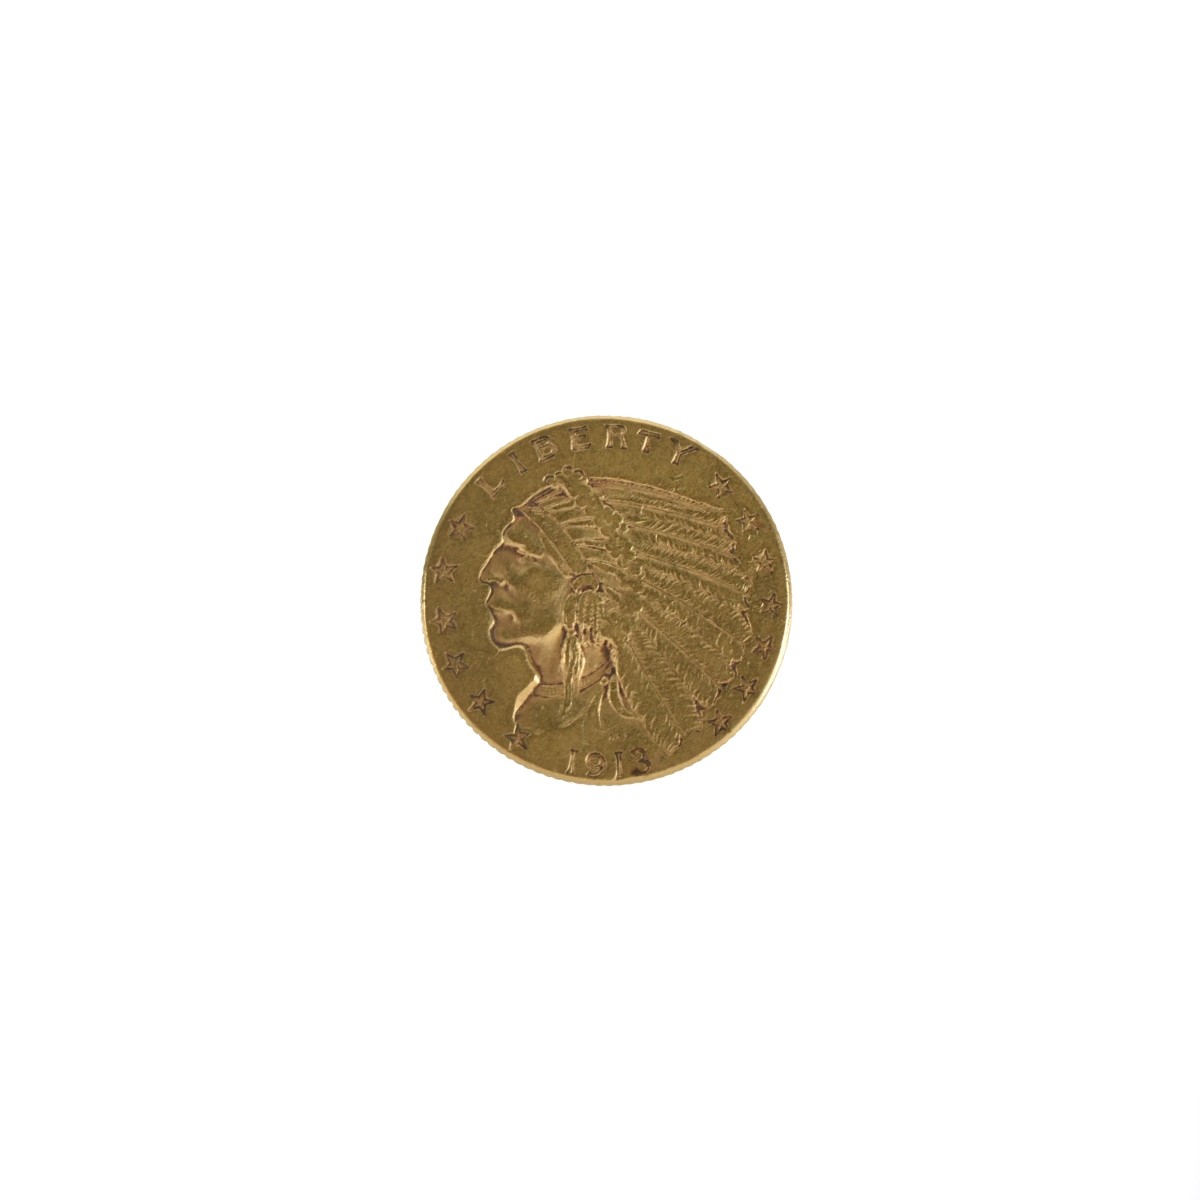 US Indian Head $2-1/2 Gold Coin